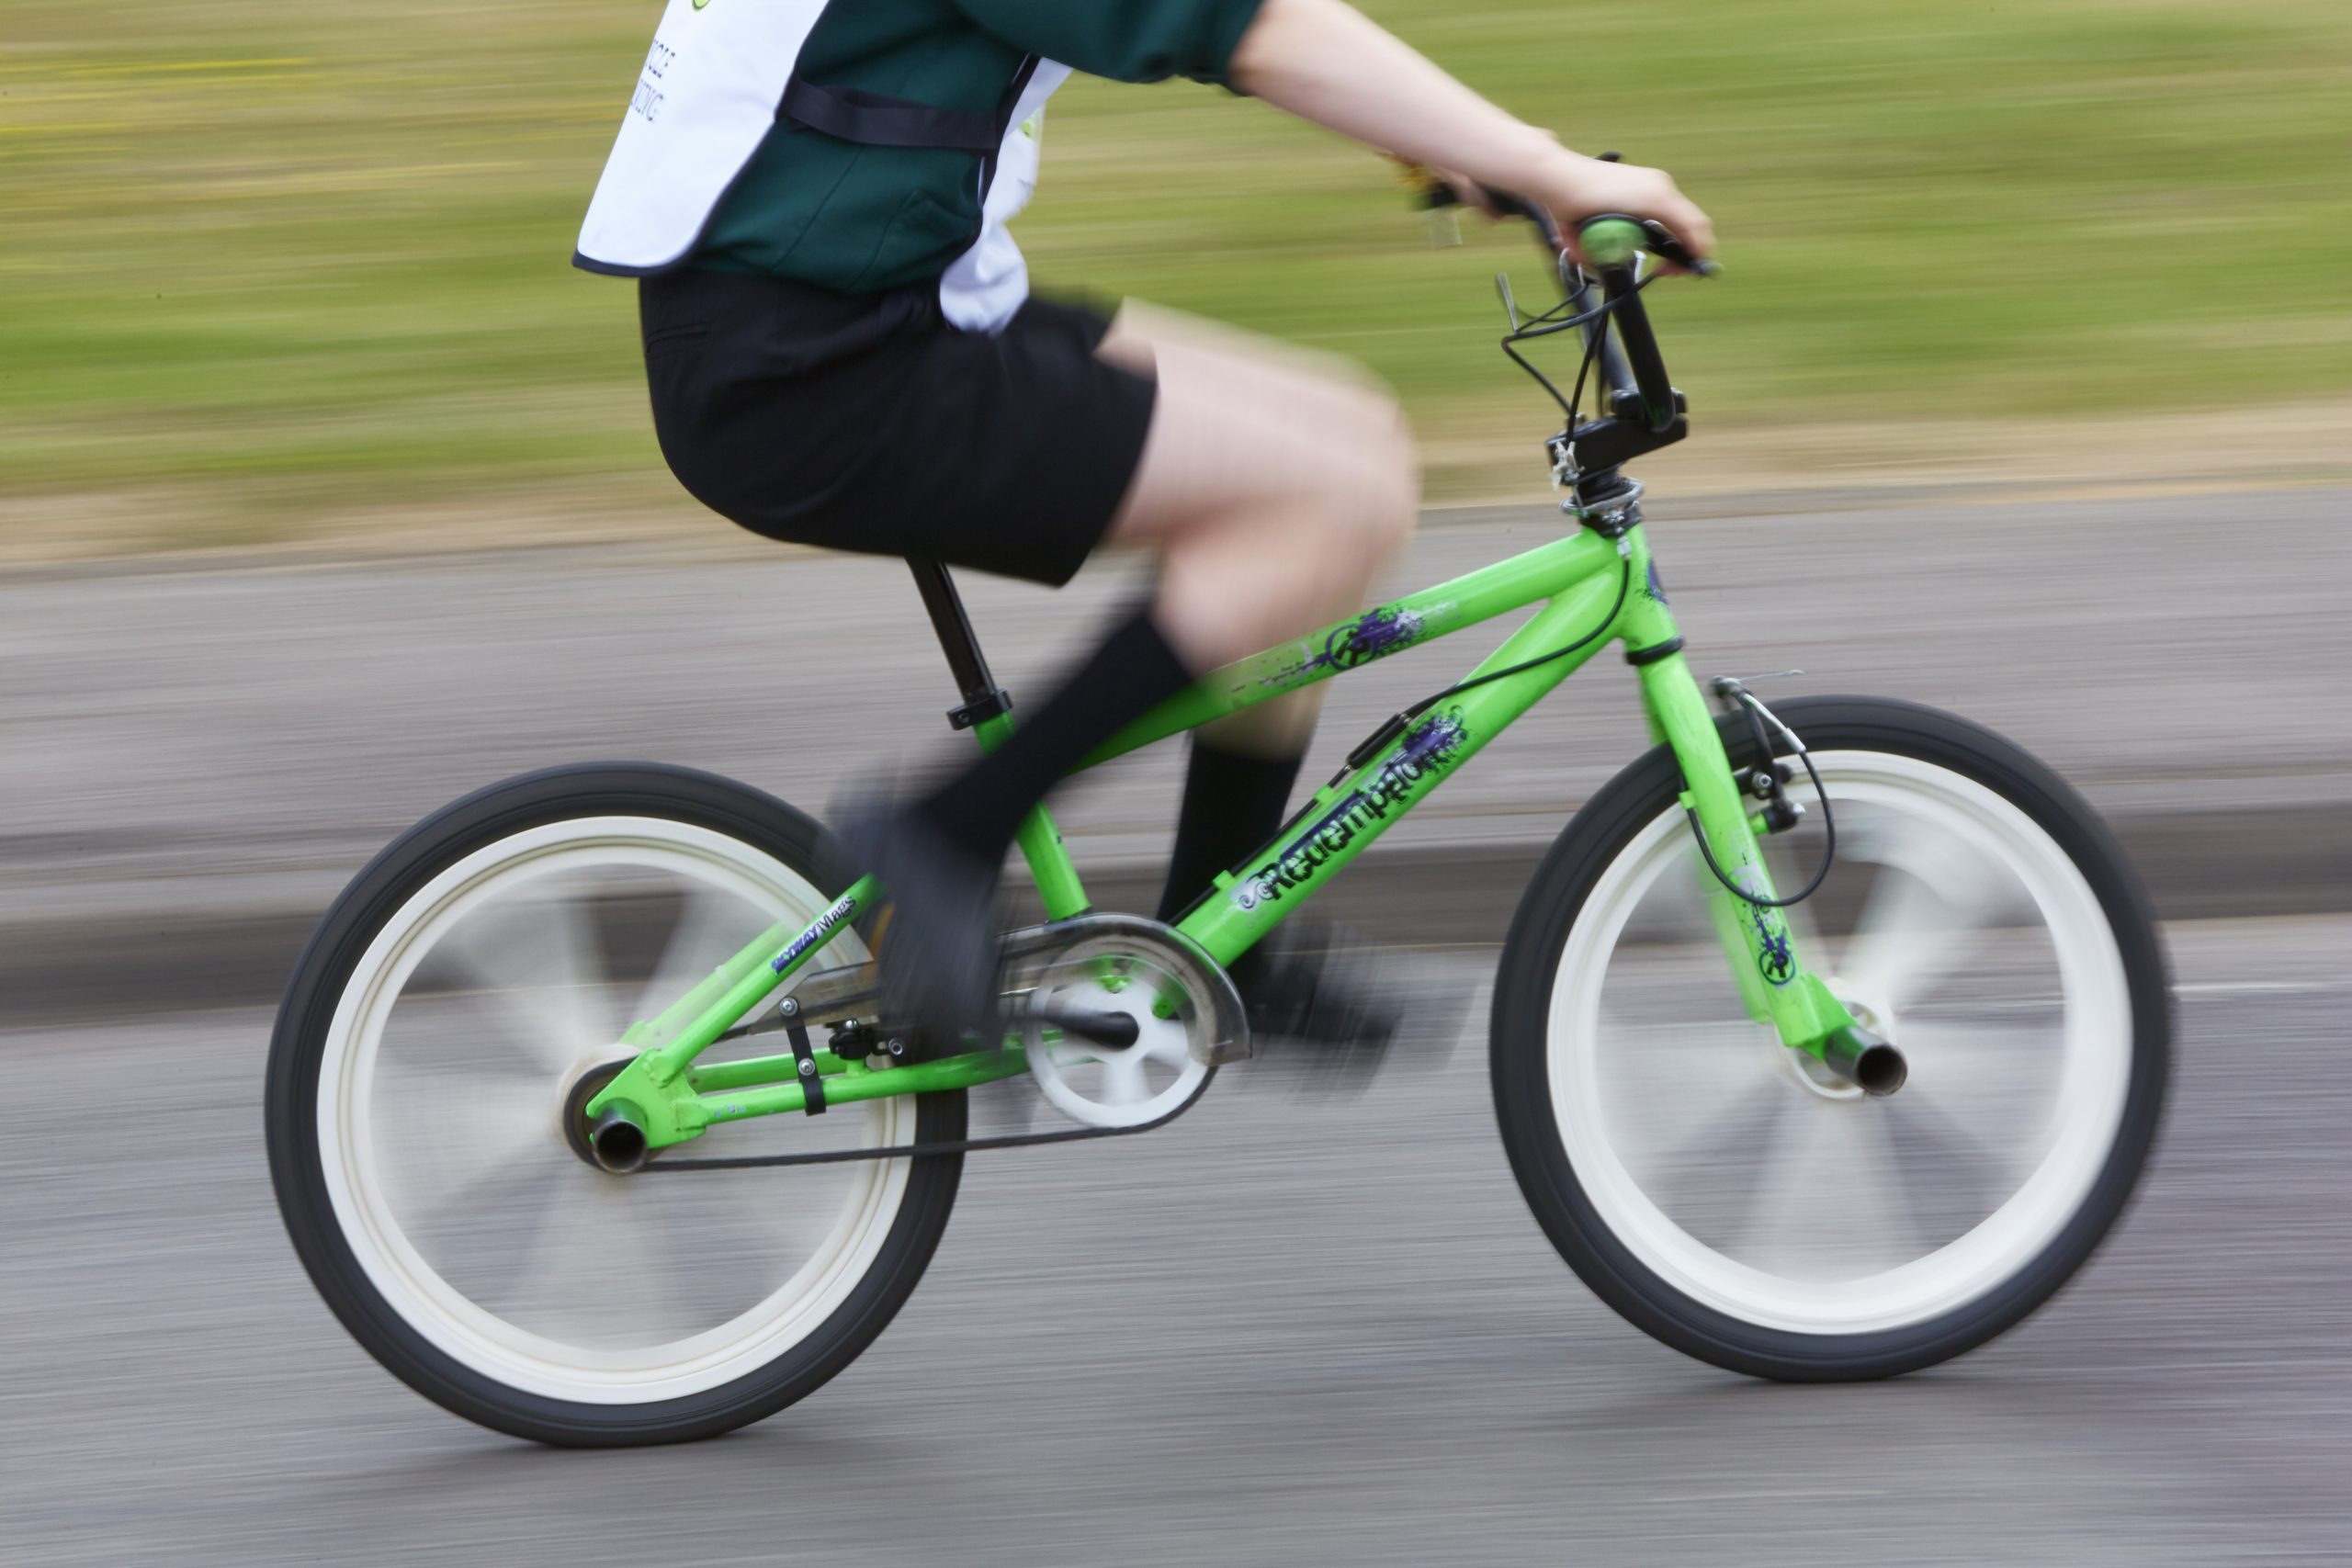 A image of a child riding a bike which is cut off from the shoulders.